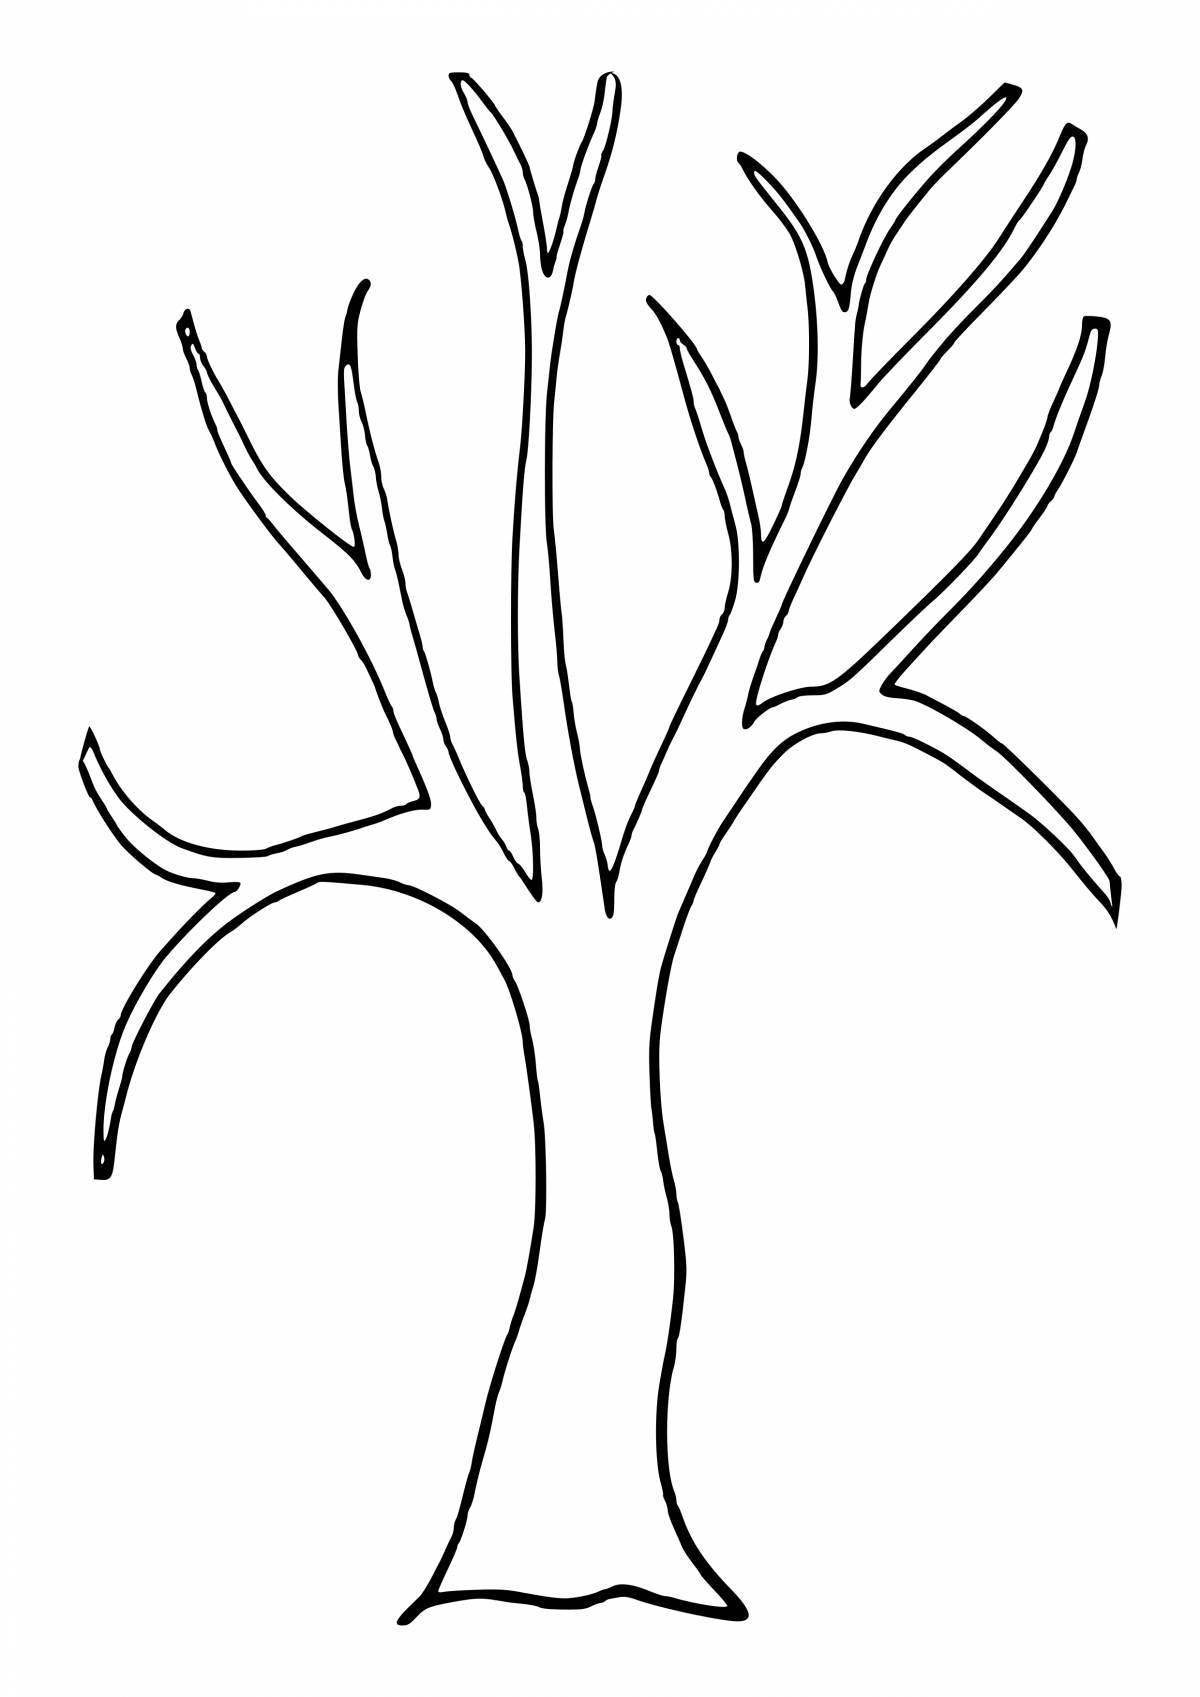 Glitter pattern tree coloring page